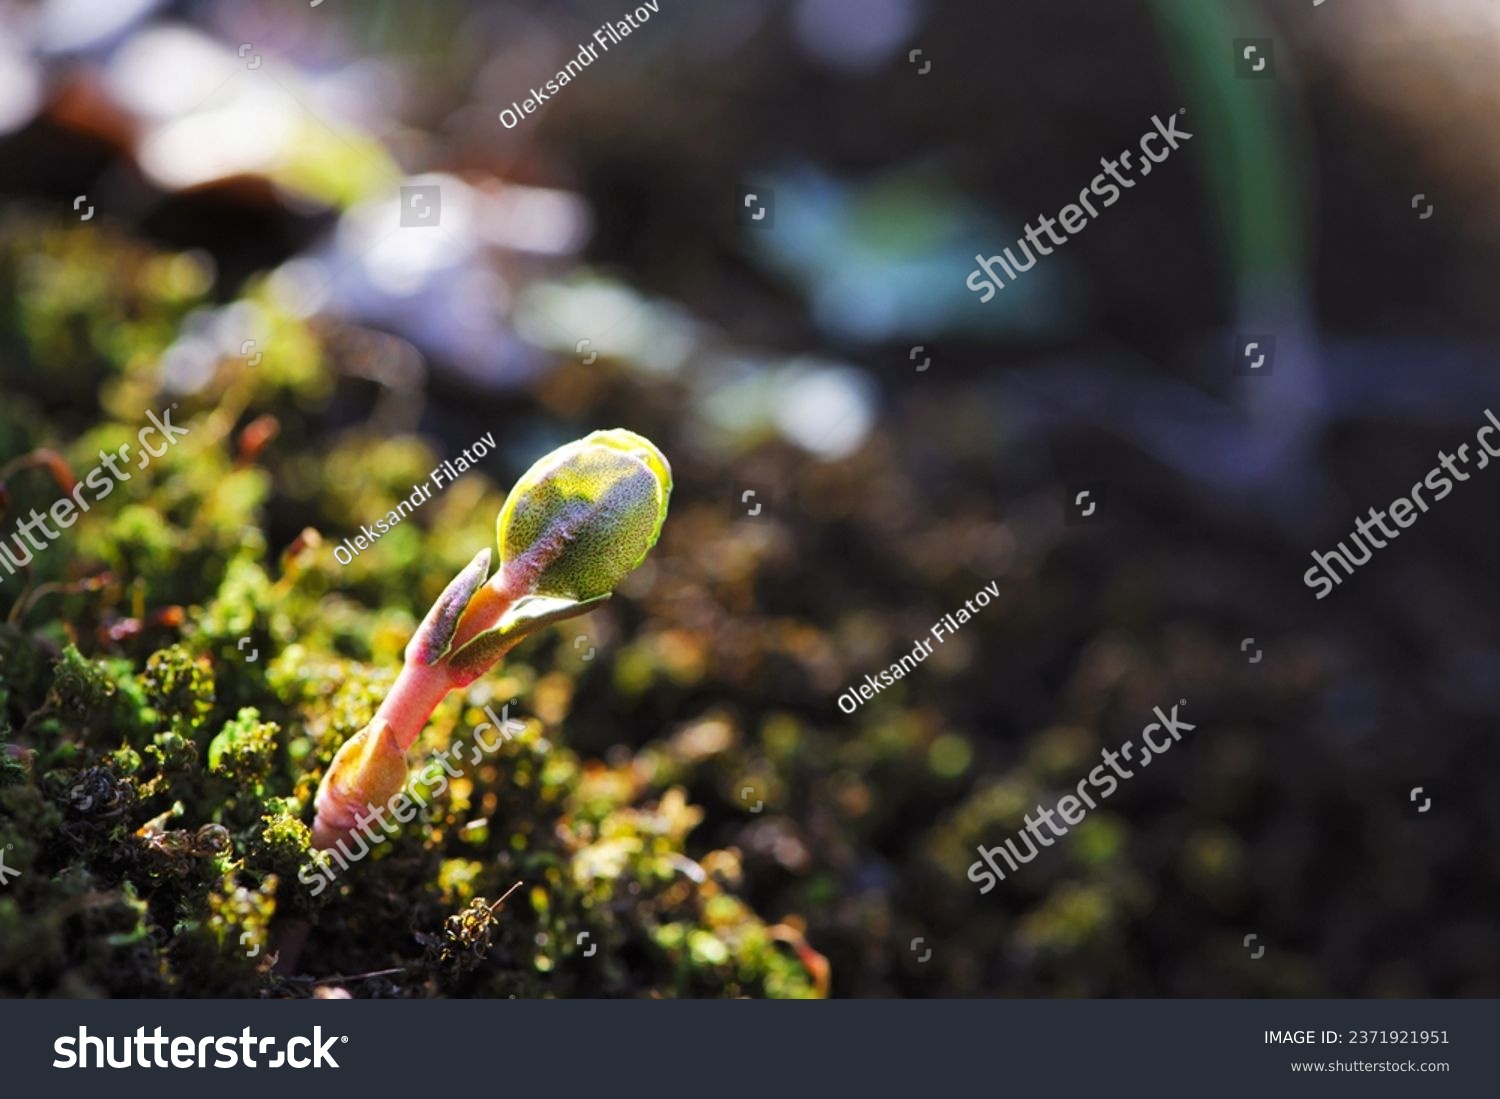 A small plant germinates in spring. Close up of young seeds germination and growing plants, wet green moss, natural background. growing, sprout, early spring. macro nature #2371921951